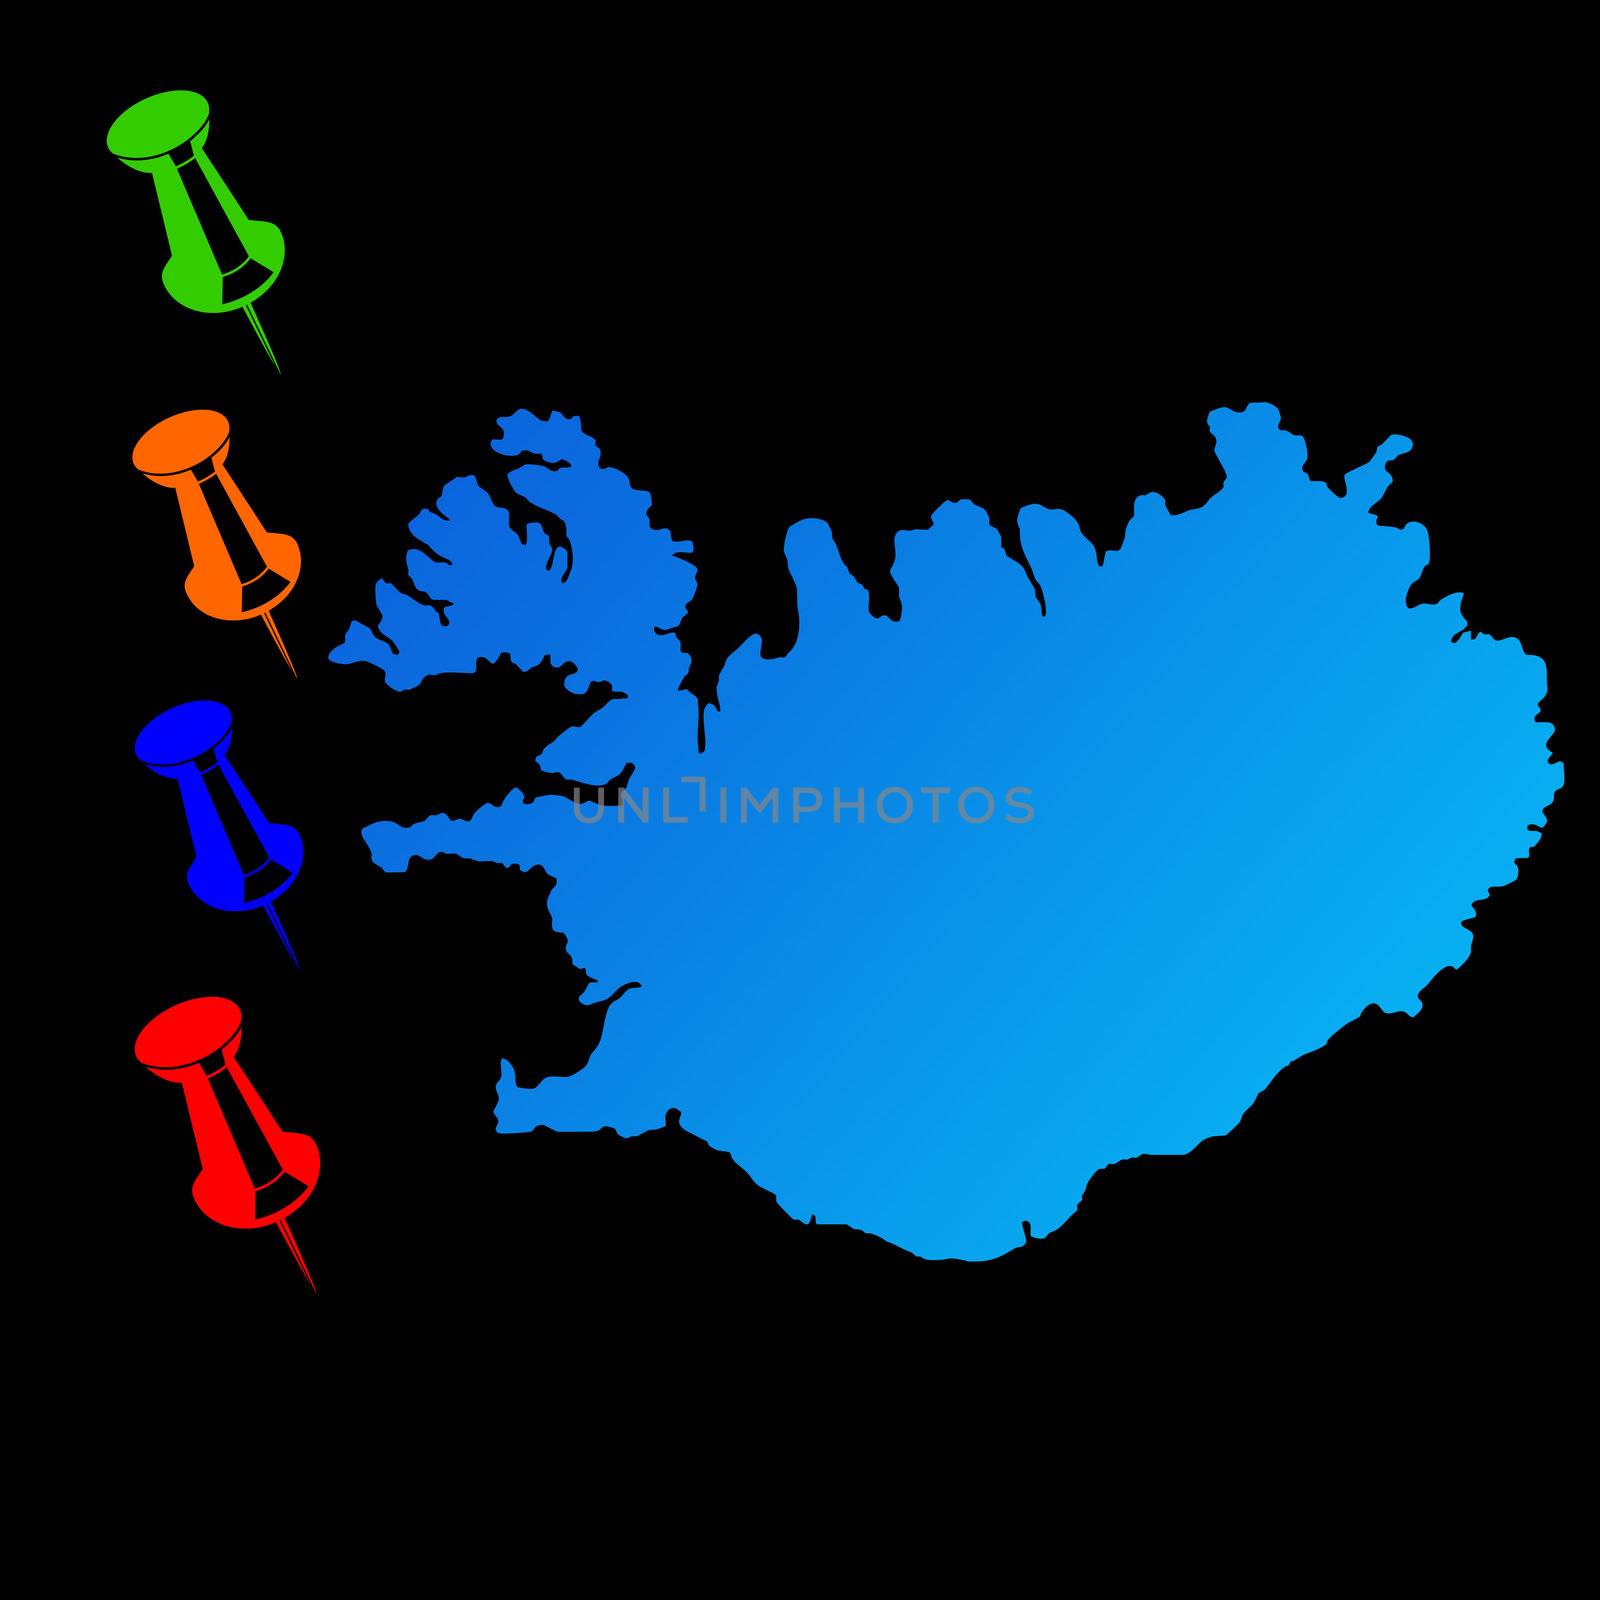 Iceland travel map by speedfighter